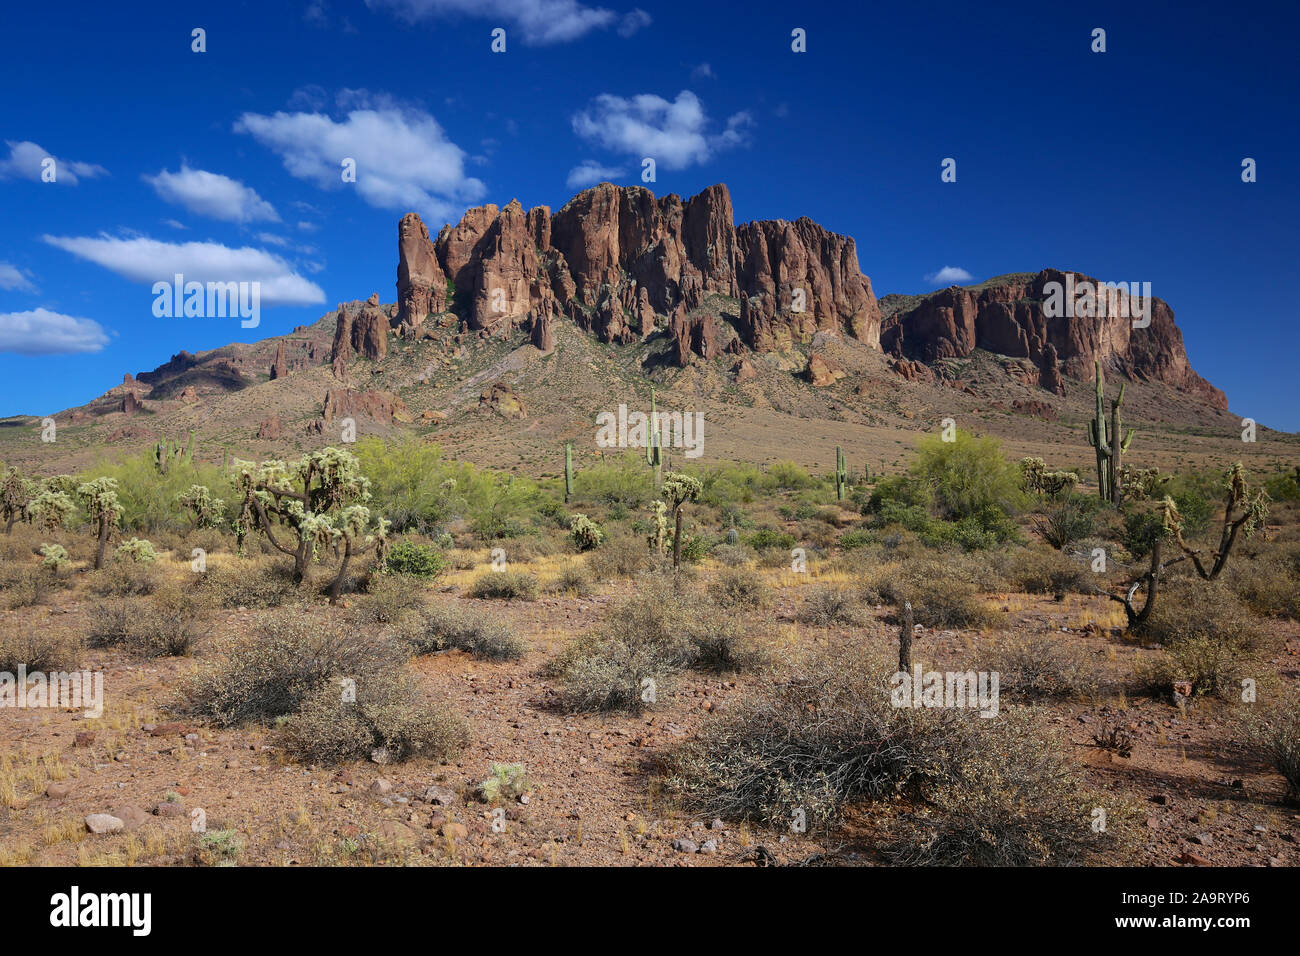 Superstition Mountains and cactus desert landscape in Lost Dutchman State Park, Arizona Stock Photo